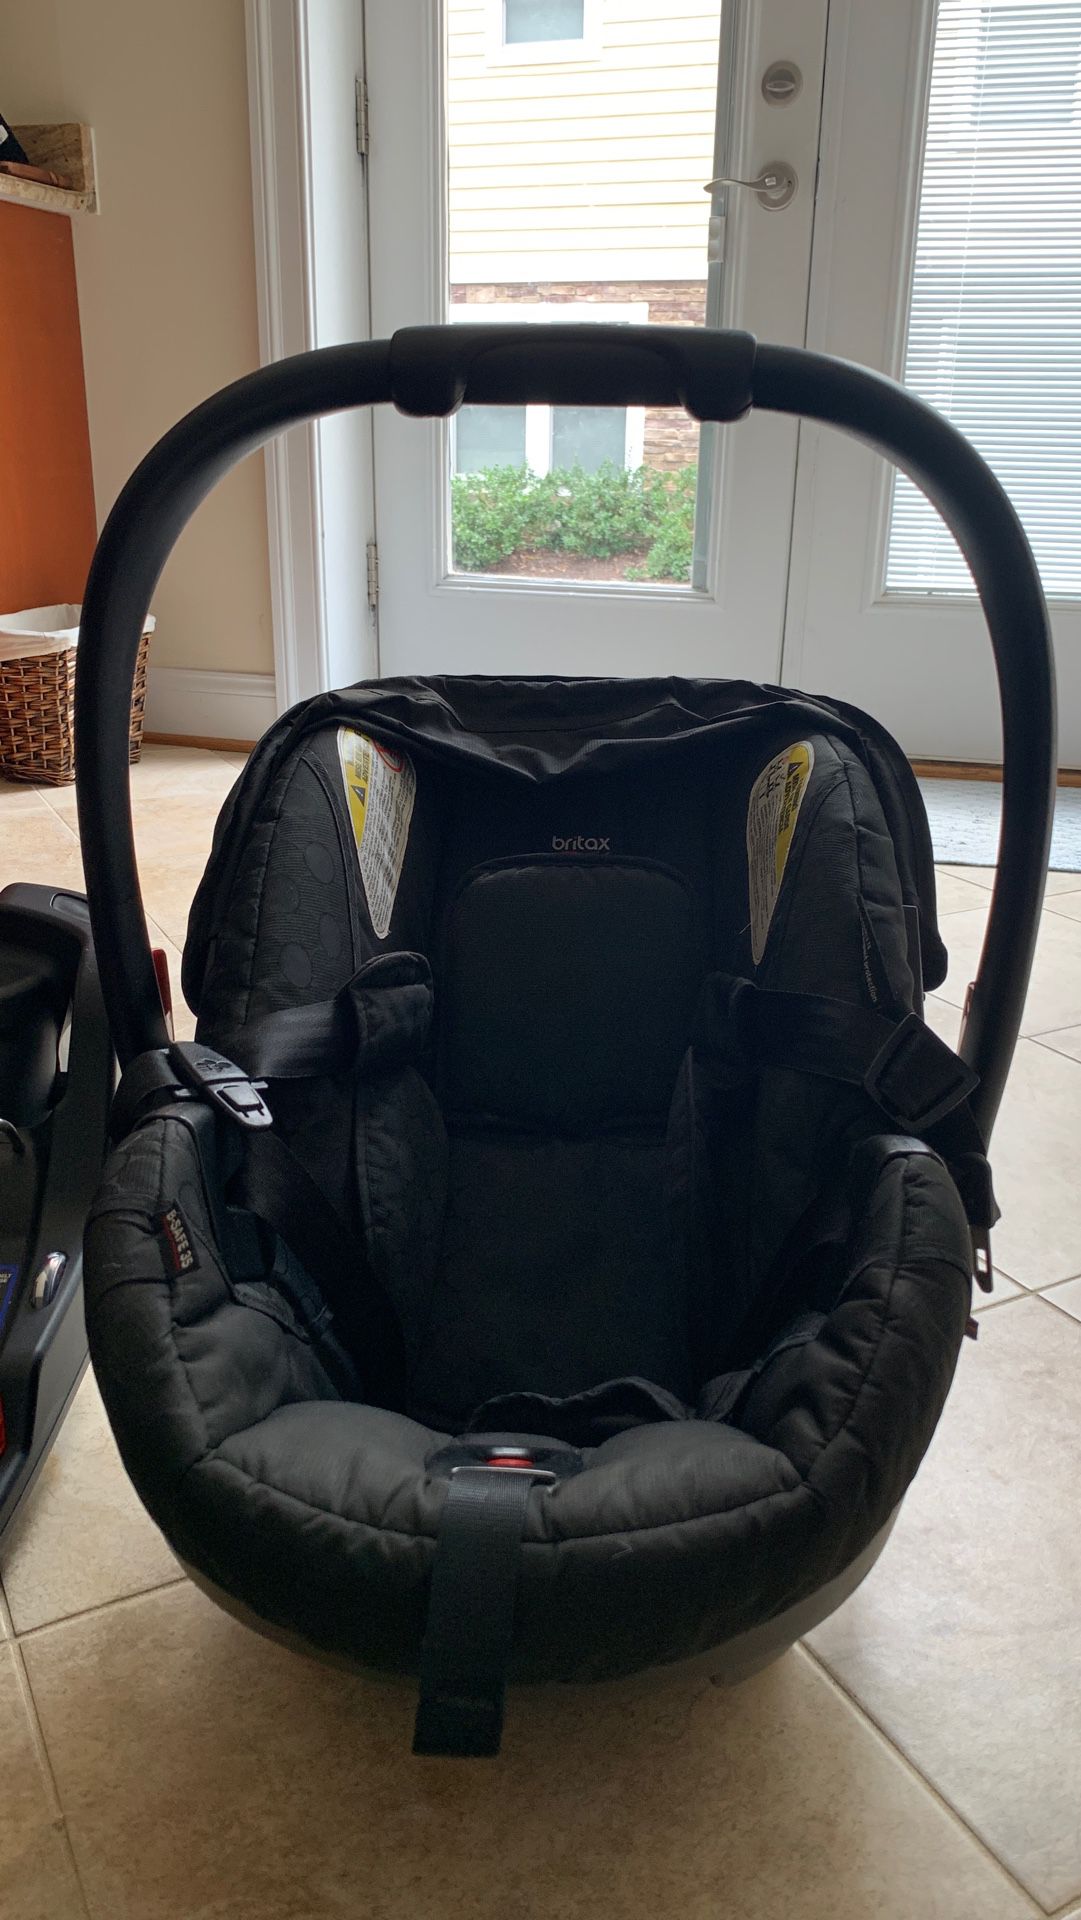 Britax infant car seat with two bases